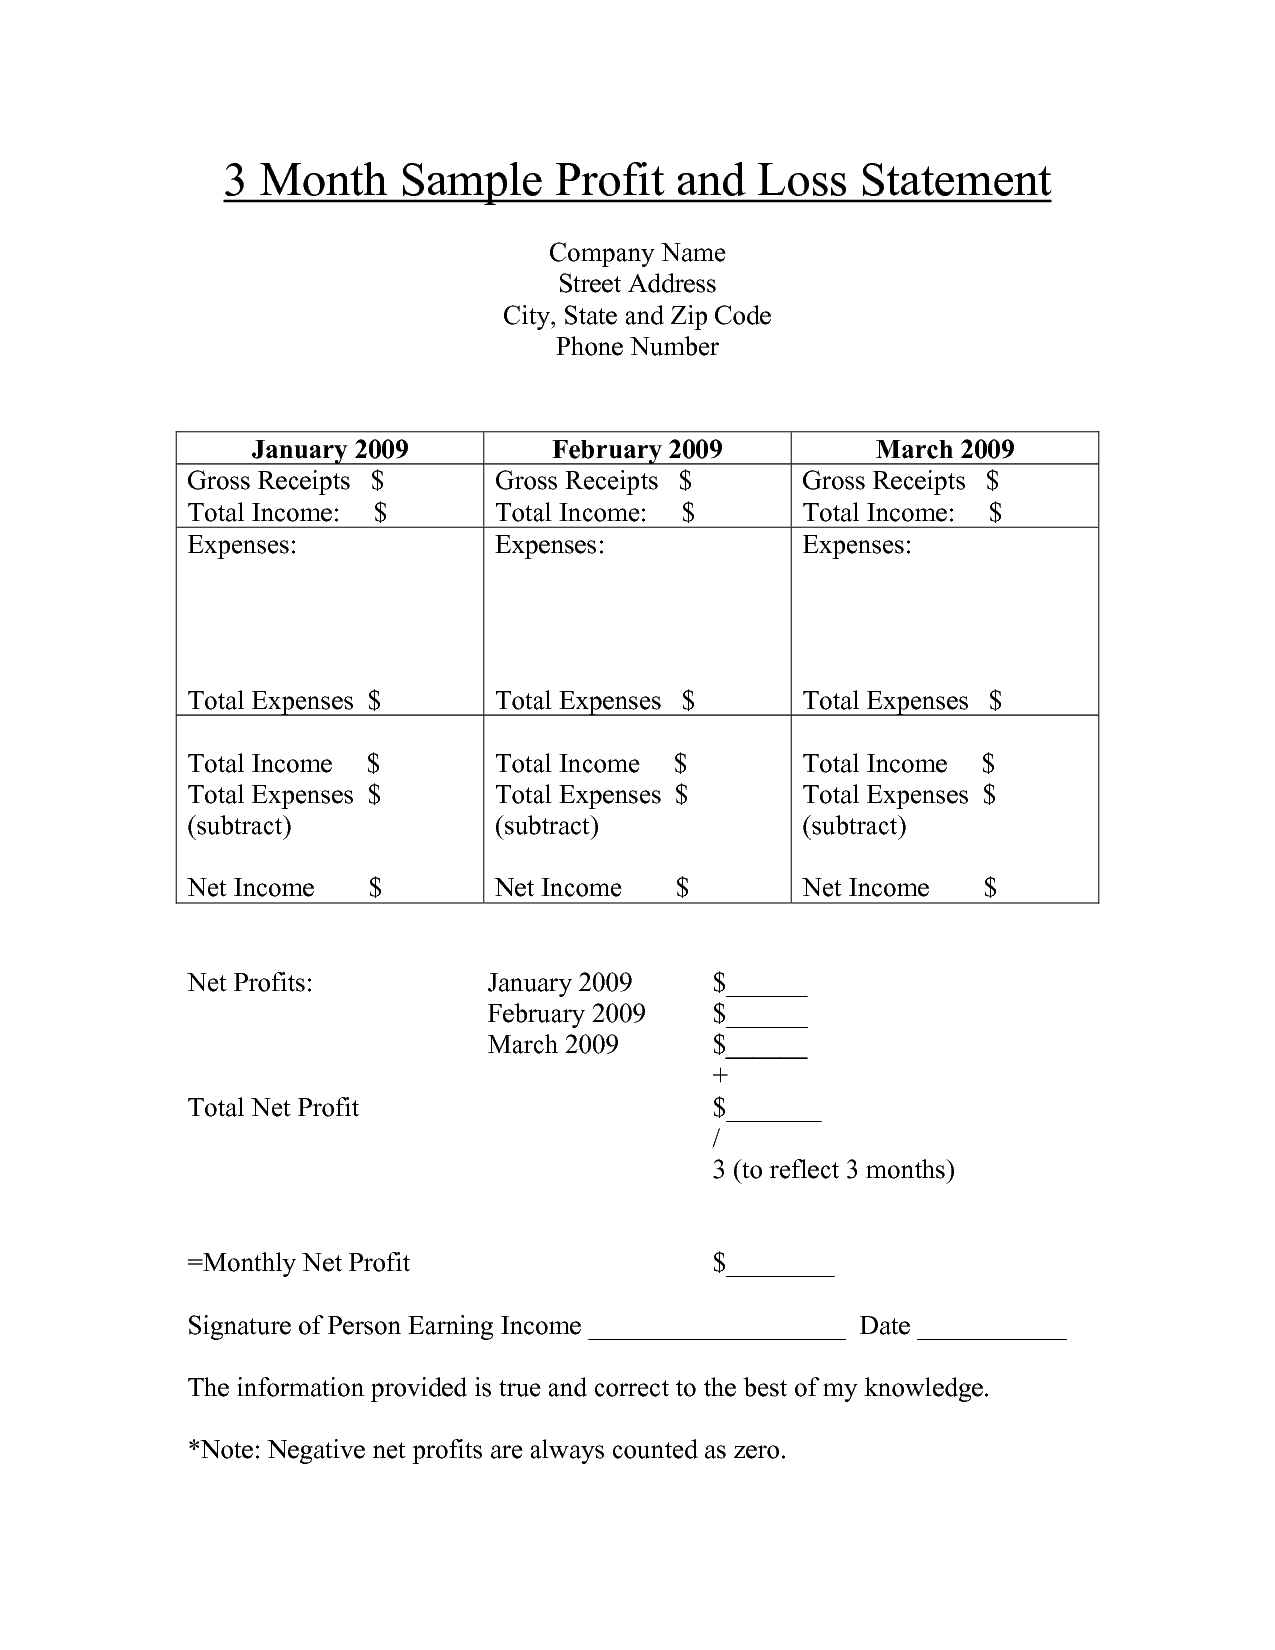 Self Storage Rent Increase Letter Template - Free Printable Profit and Loss Statement form for Home Care Bing